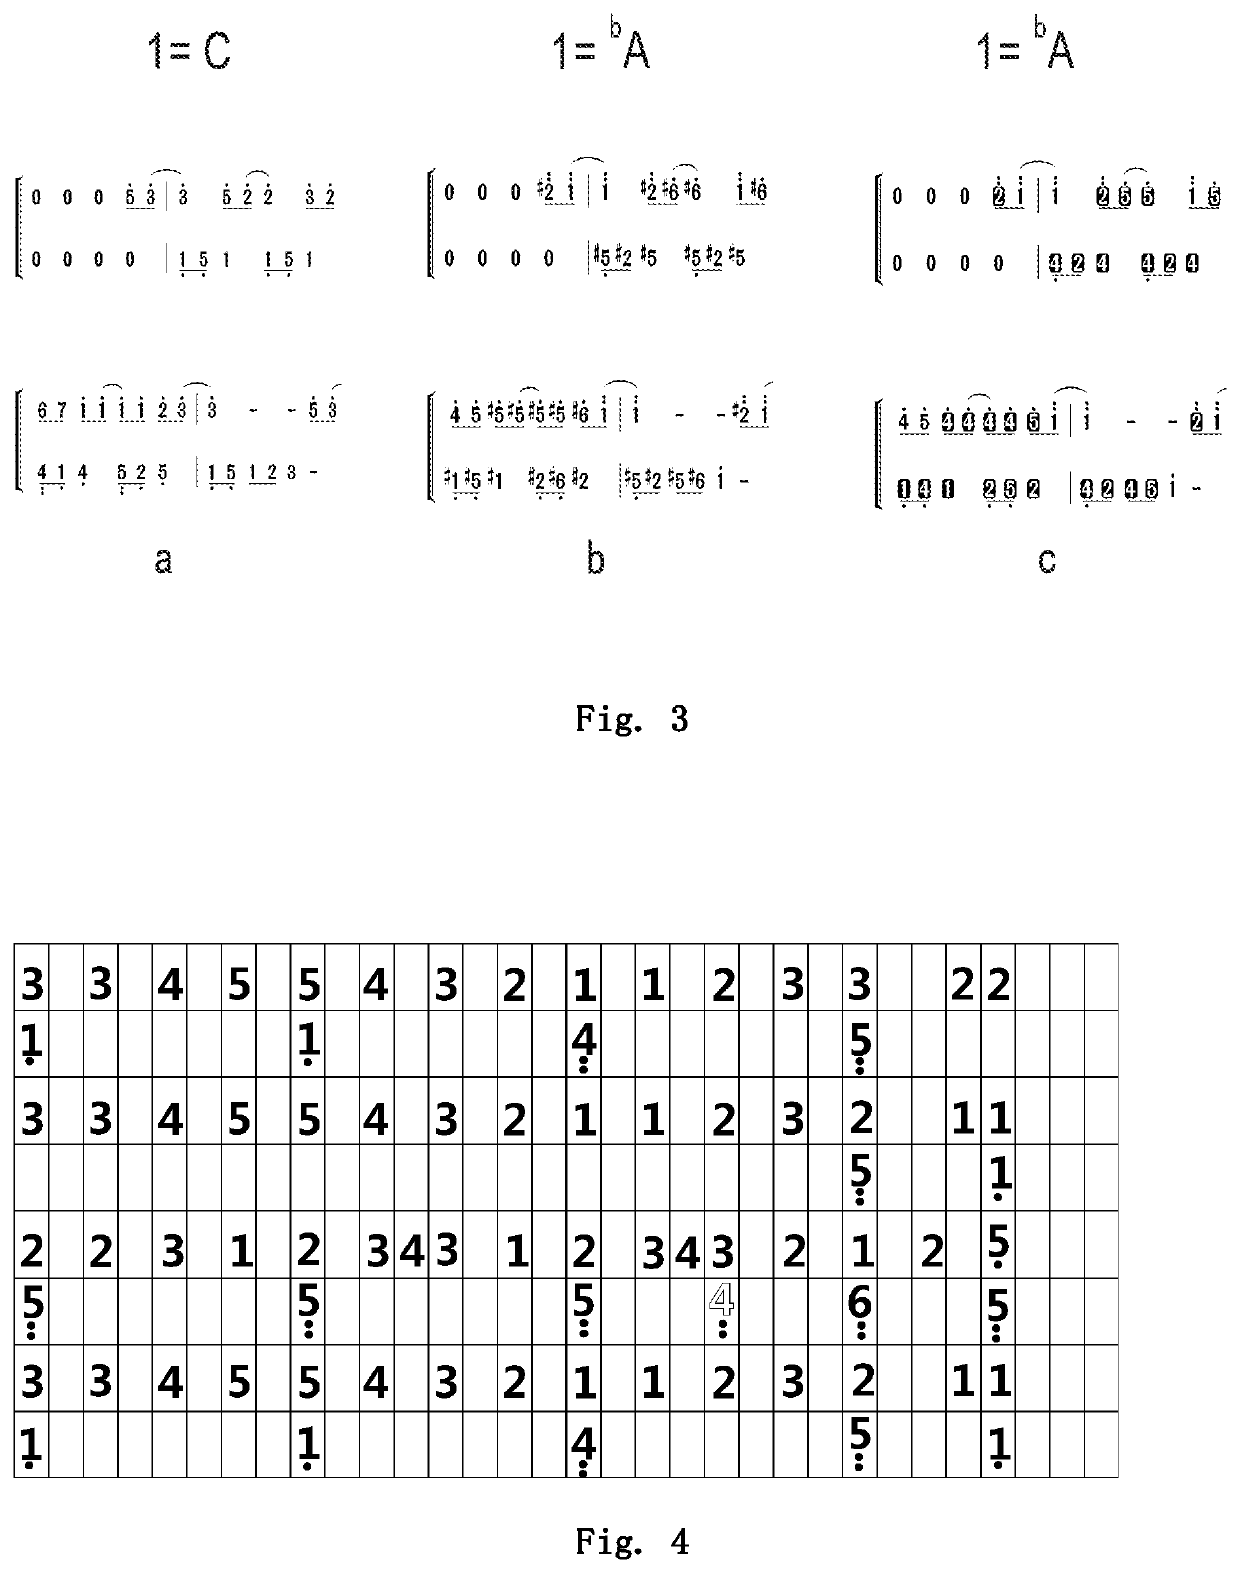 Musical notation system